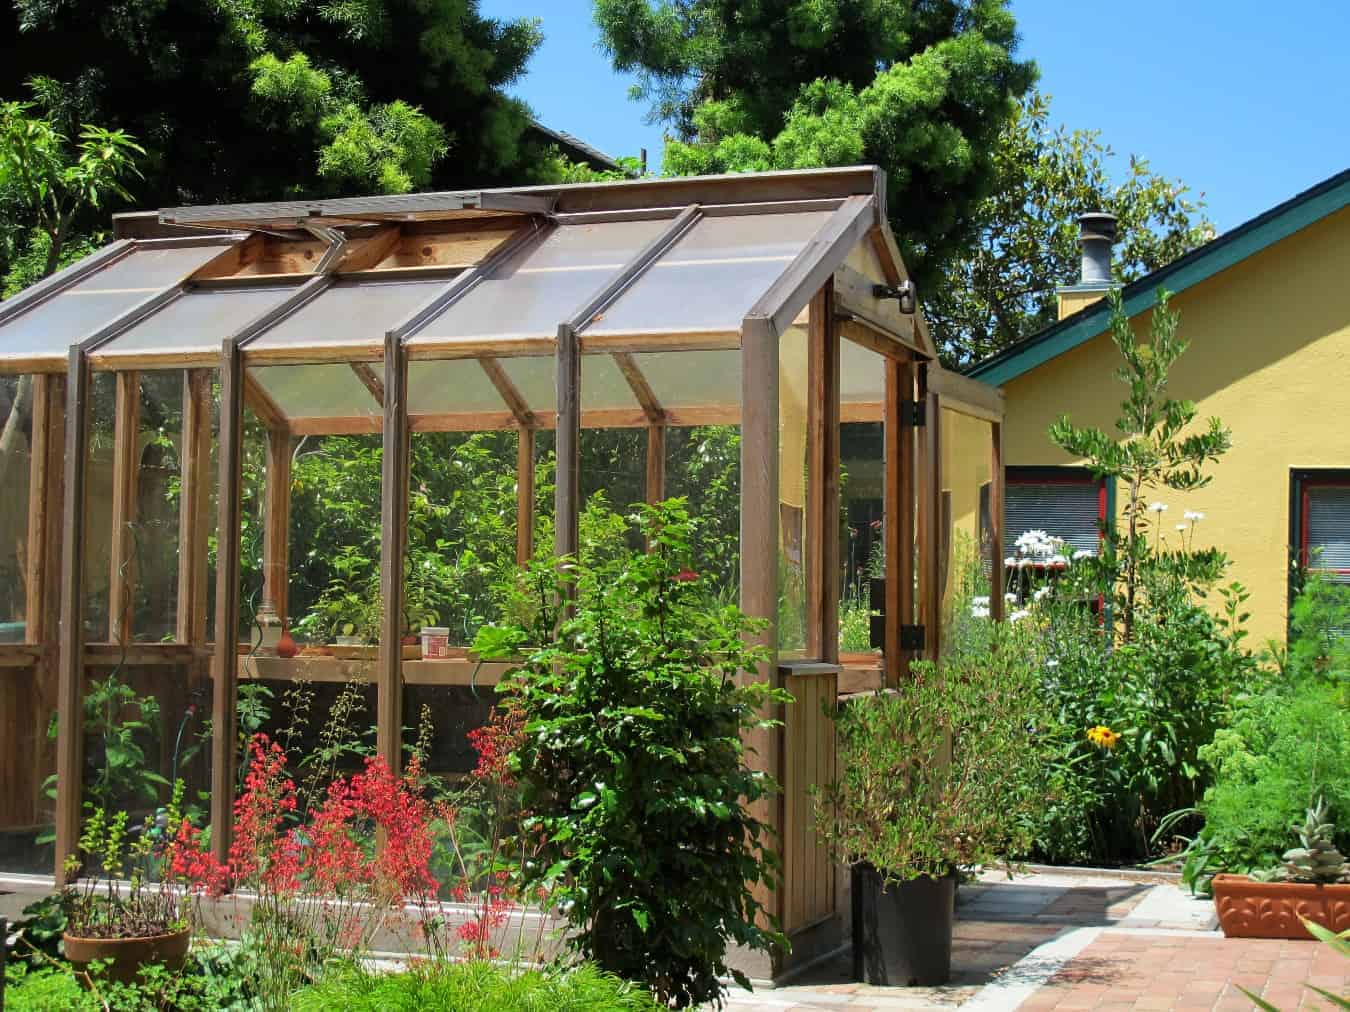  Greenhouses  provide a year round growing season Home Garden  and Homestead